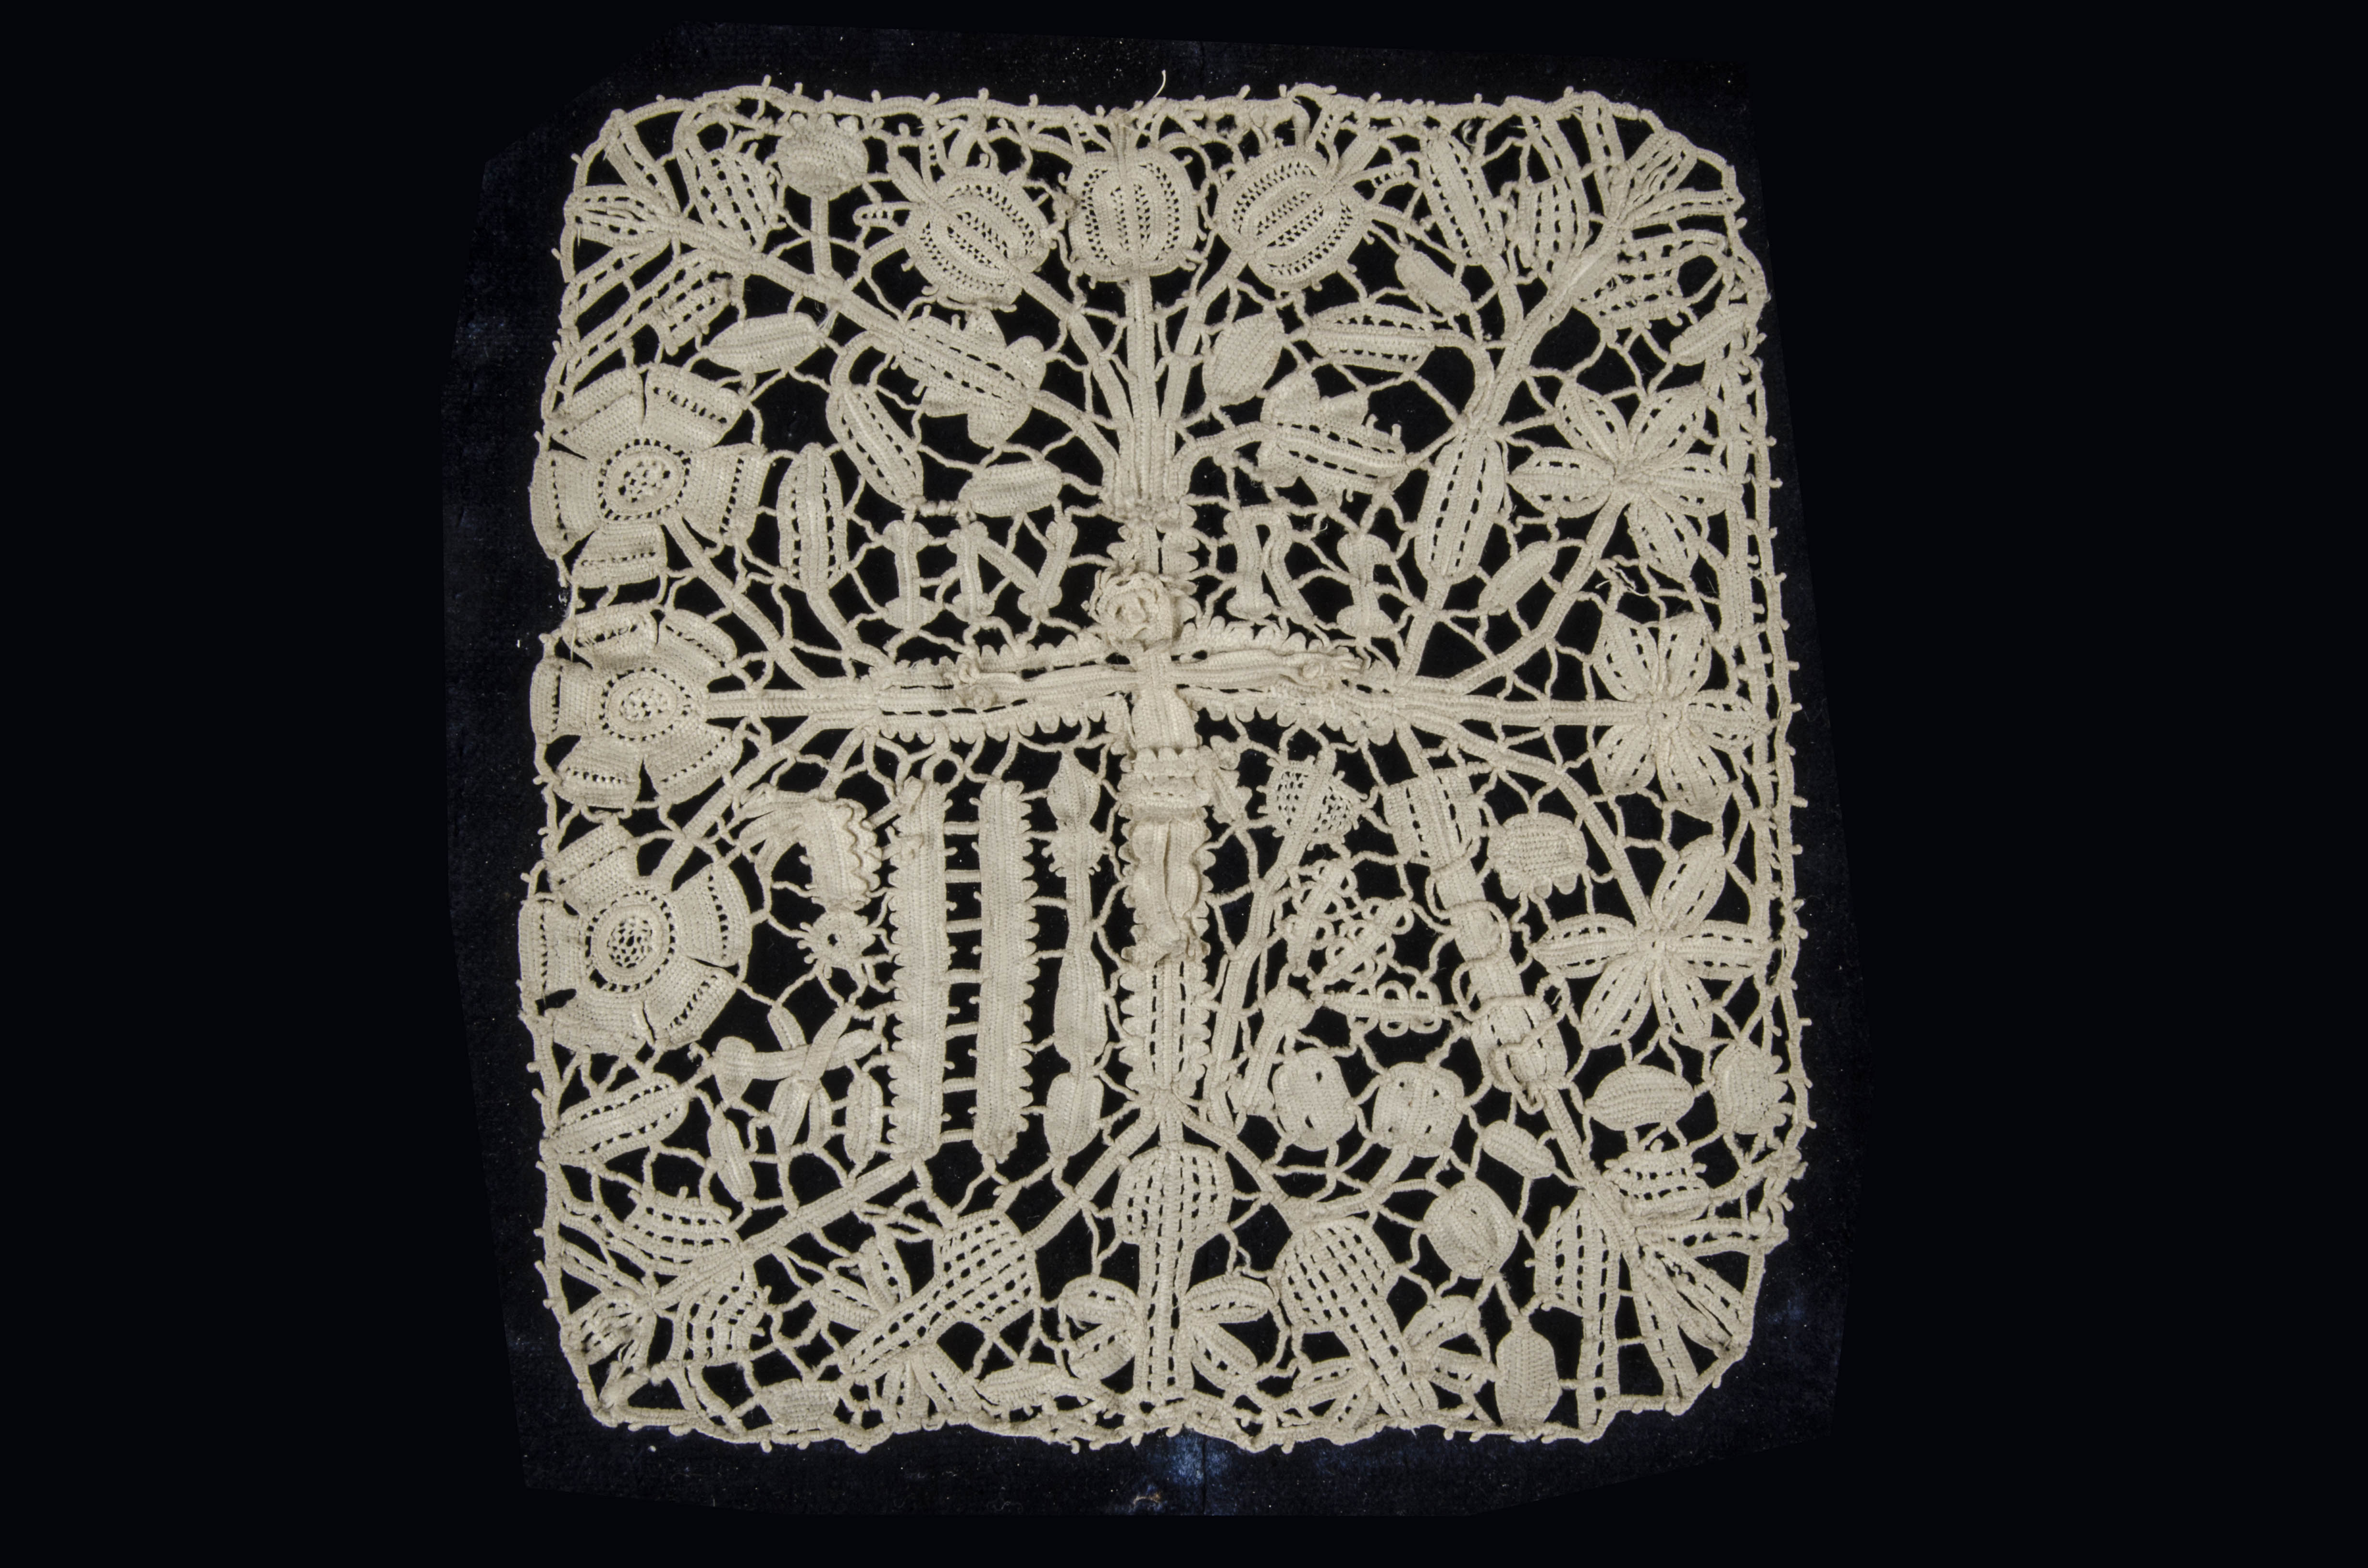 A square of 17th century needle lace, worked with a crucifixion scene among four floral vignettes